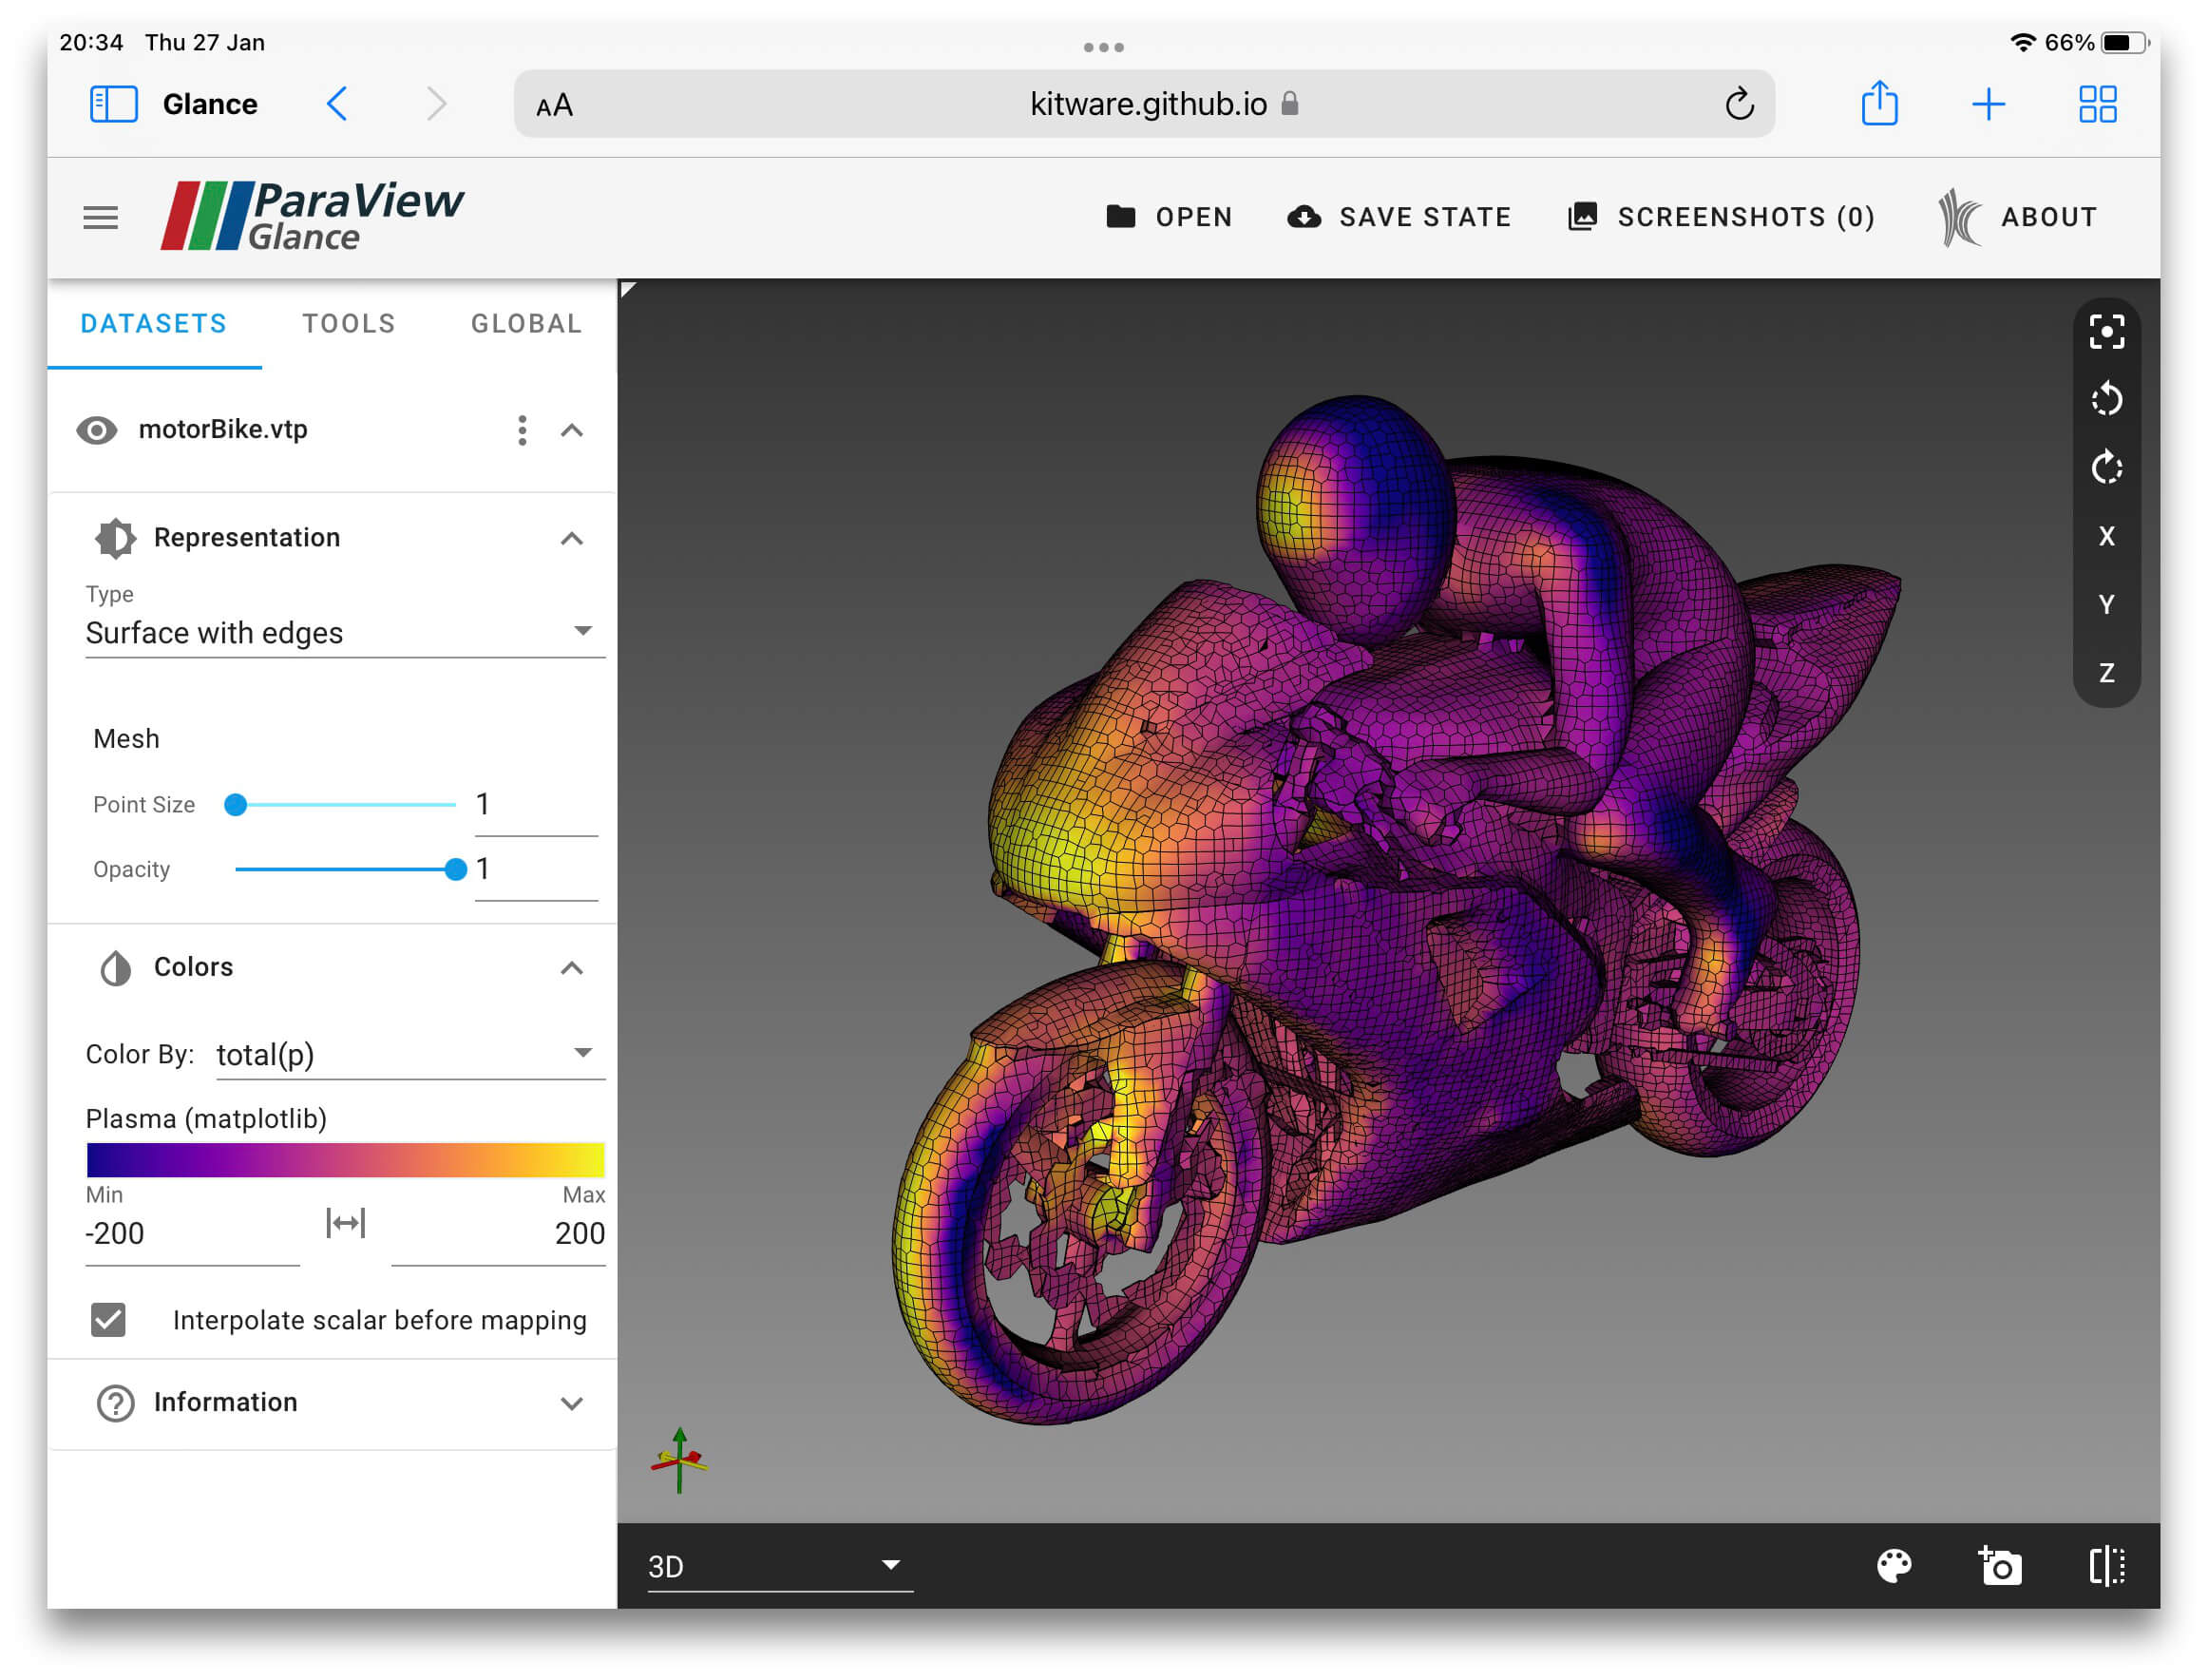 Using ParaView Glance on my iPad to inspect the motorBike tutorial data